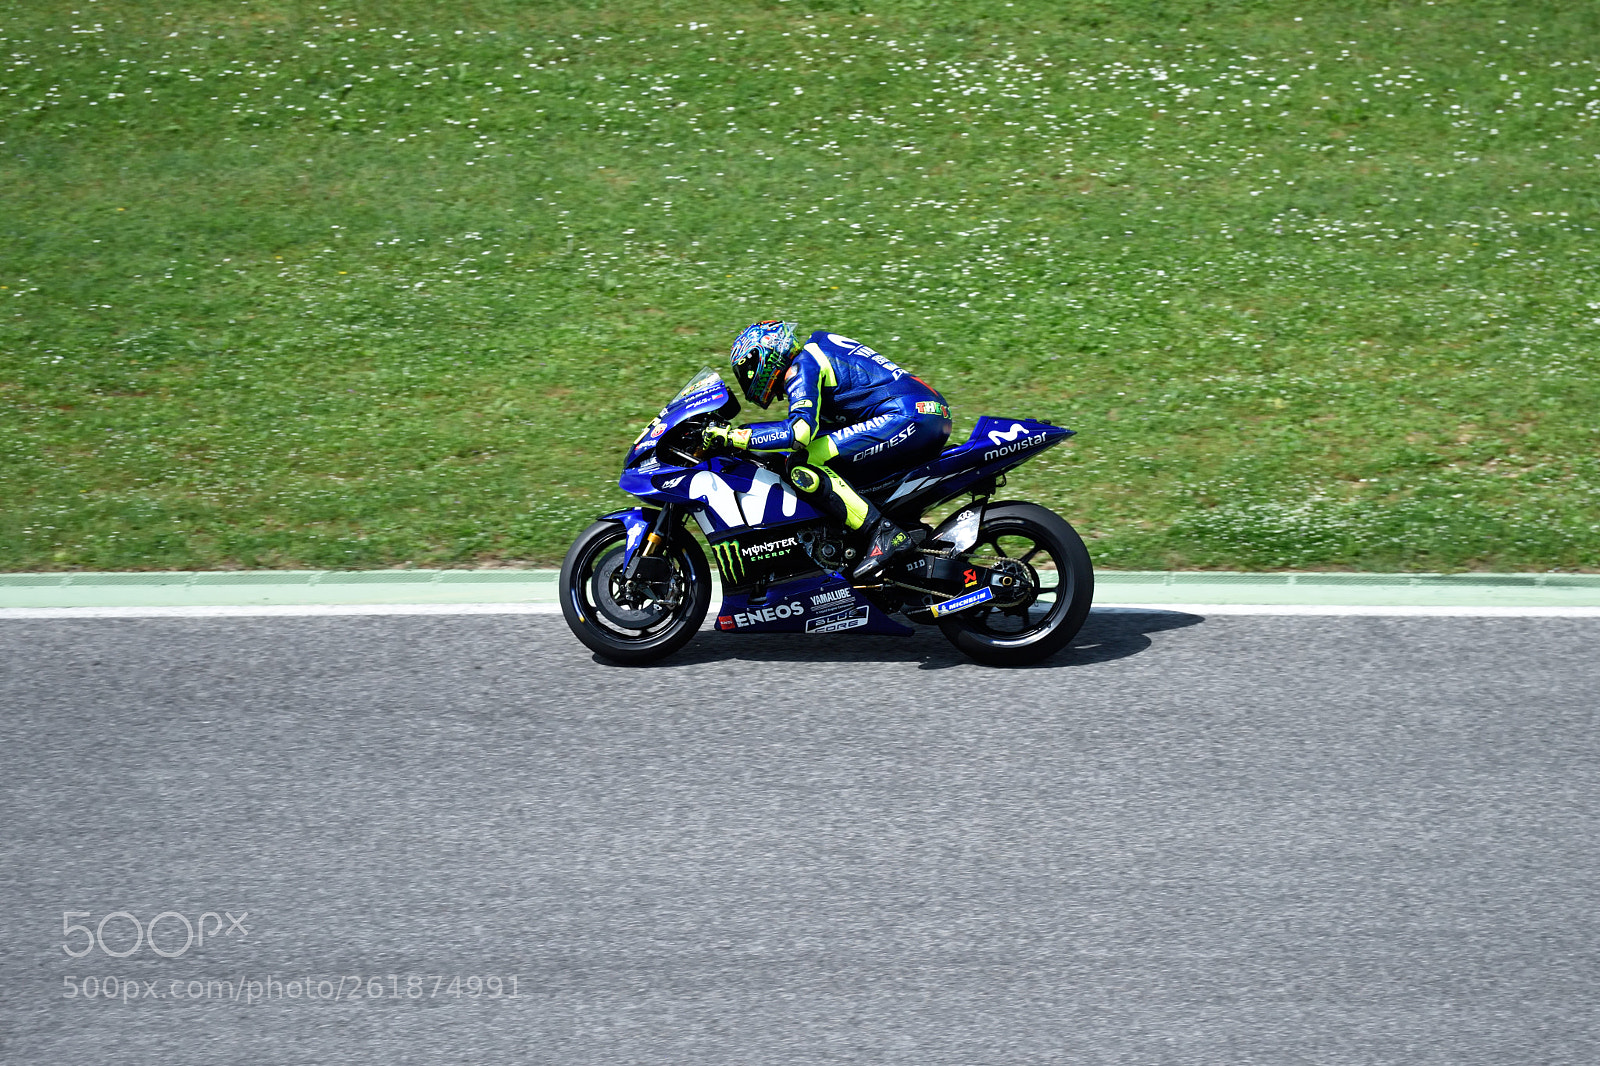 Nikon D810 sample photo. Vr46 the doctor 03 photography